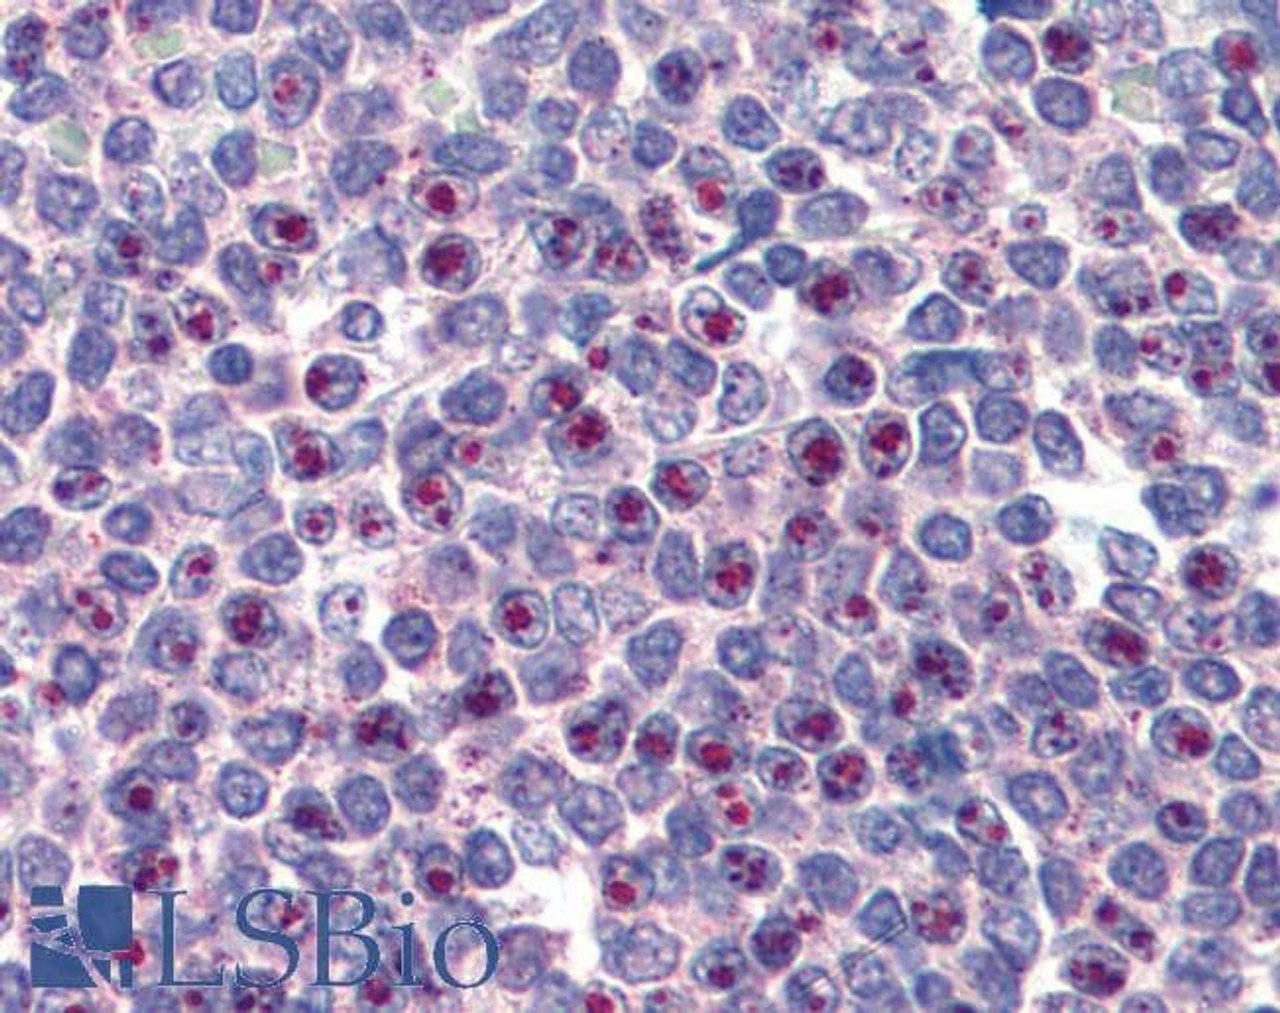 45-603 (3.75ug/ml) staining of paraffin embedded Human Spleen. Steamed antigen retrieval with citrate buffer pH 6, AP-staining. <strong>This data is from a previous batch, not on sale.</strong>